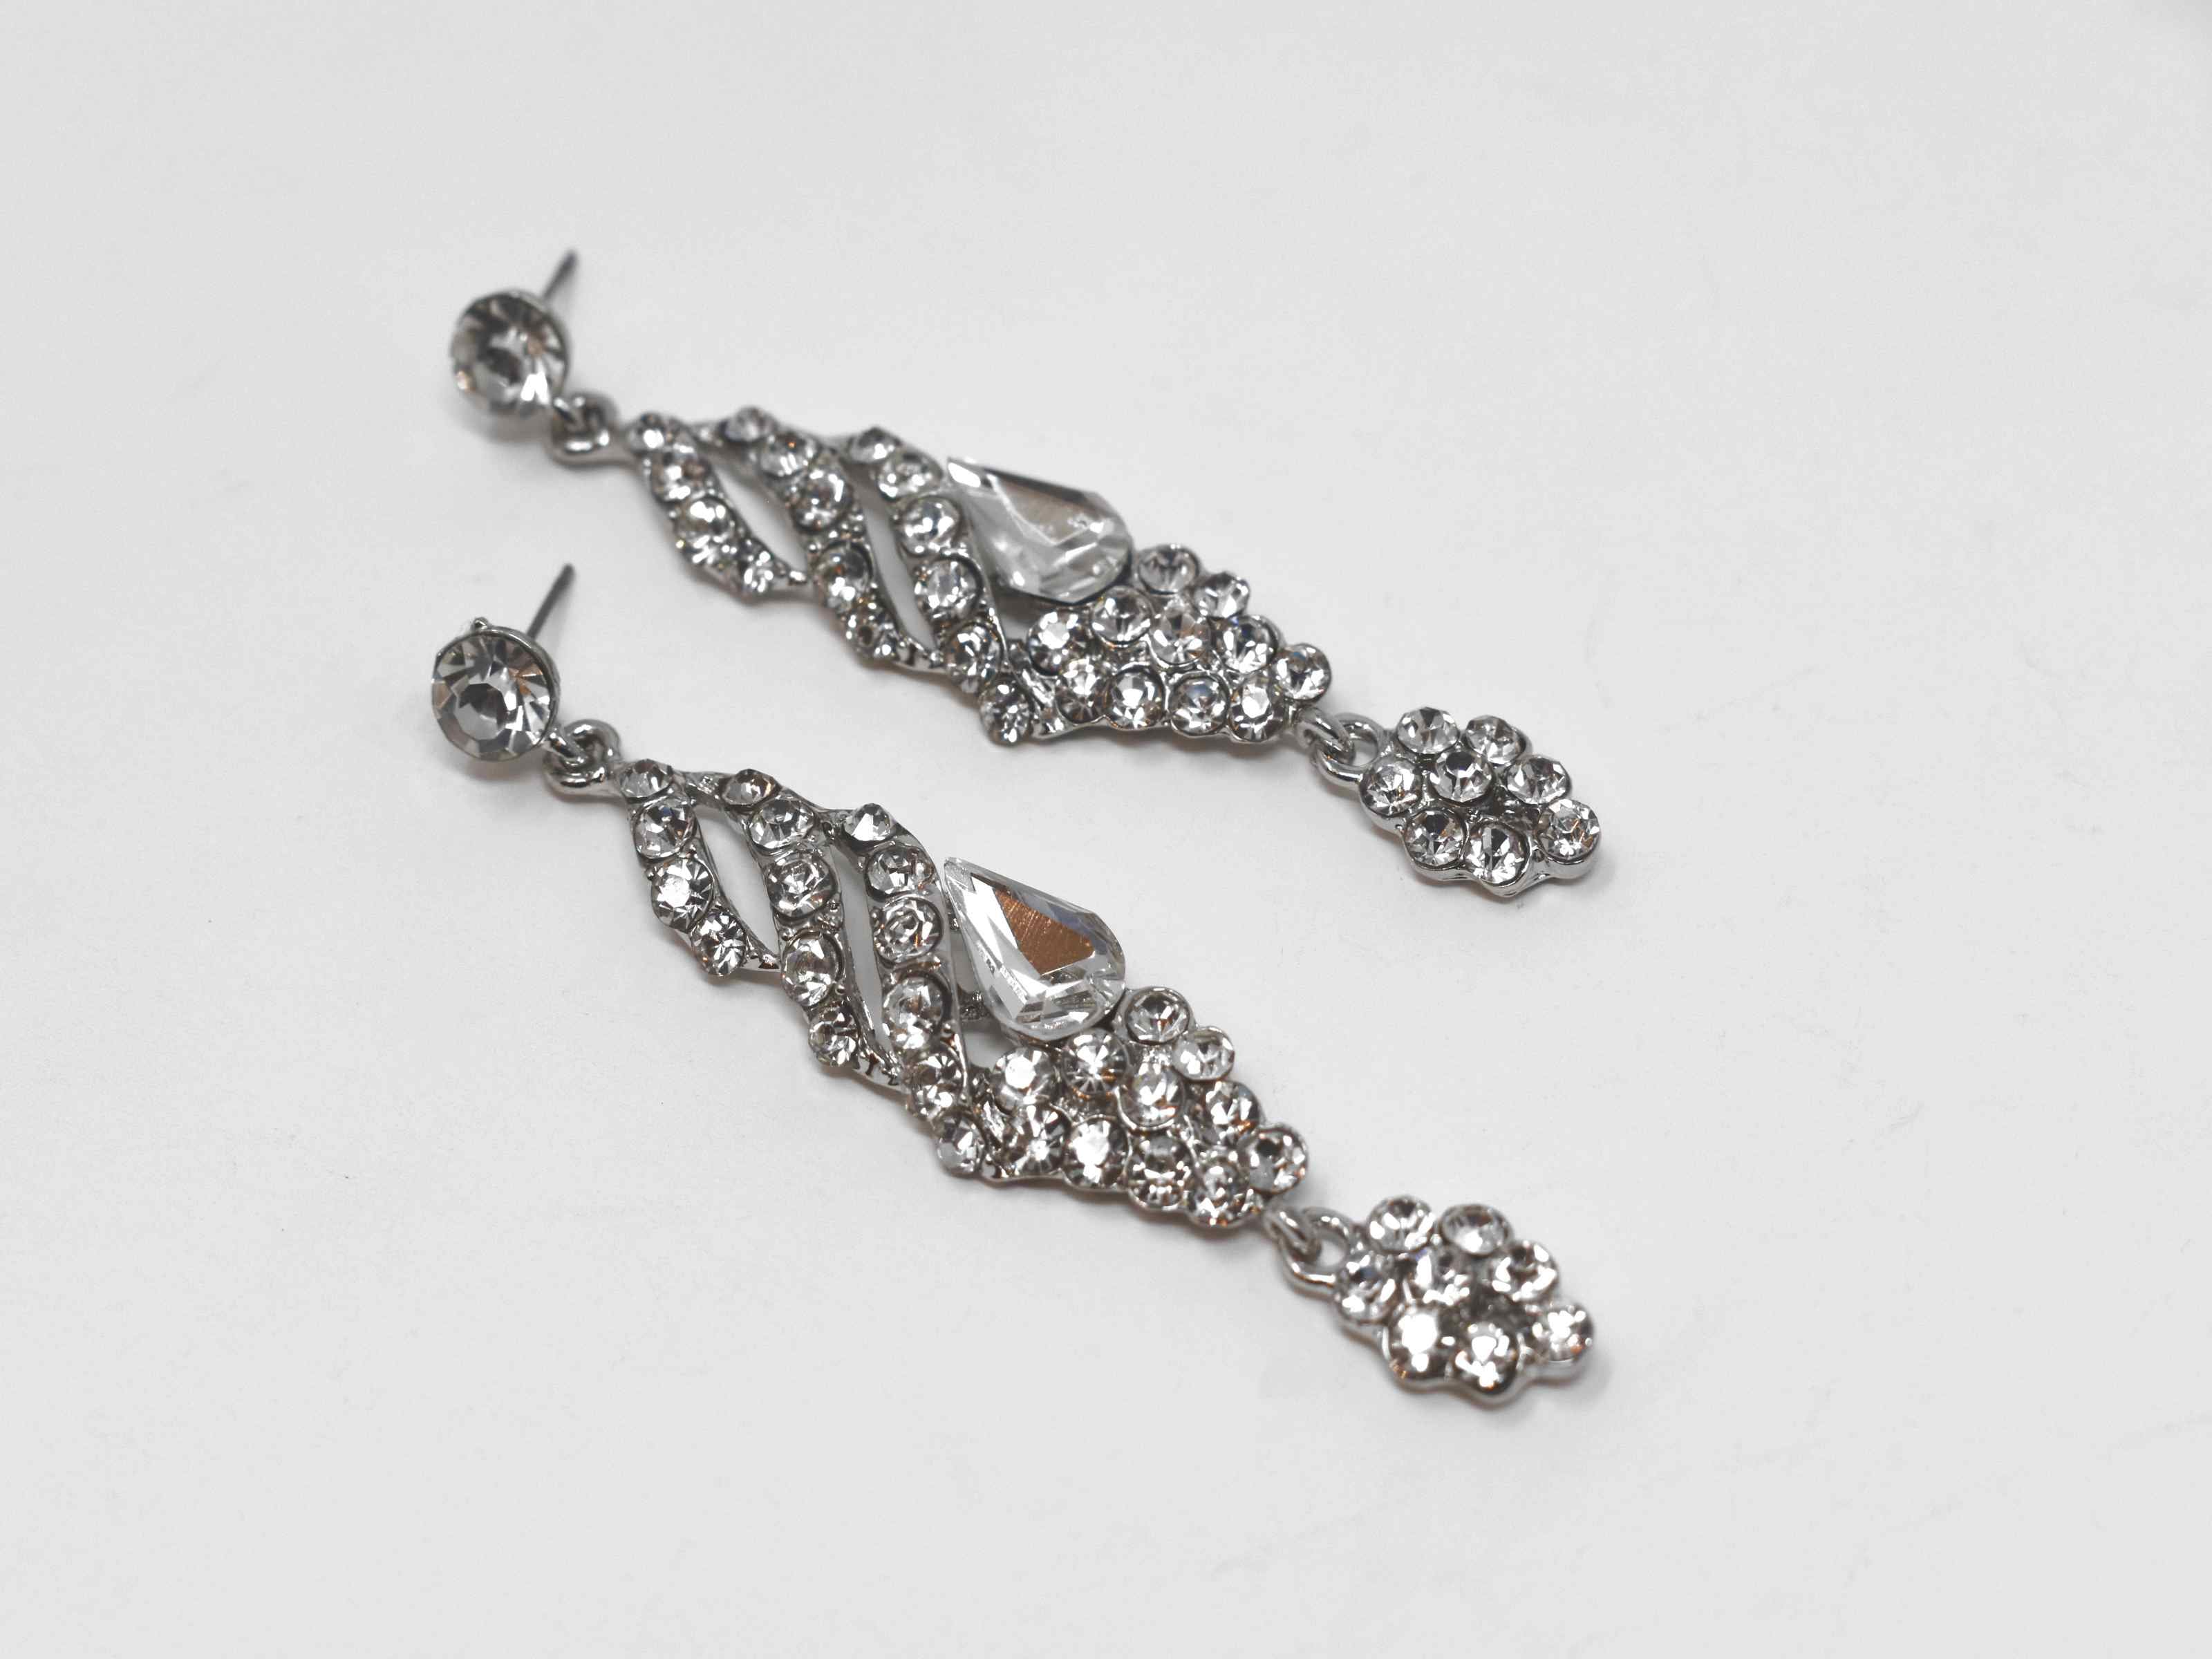 These formal silver earrings are a classic addition to your outfits. They are 3 inches in length and encrusted with clear stones. 